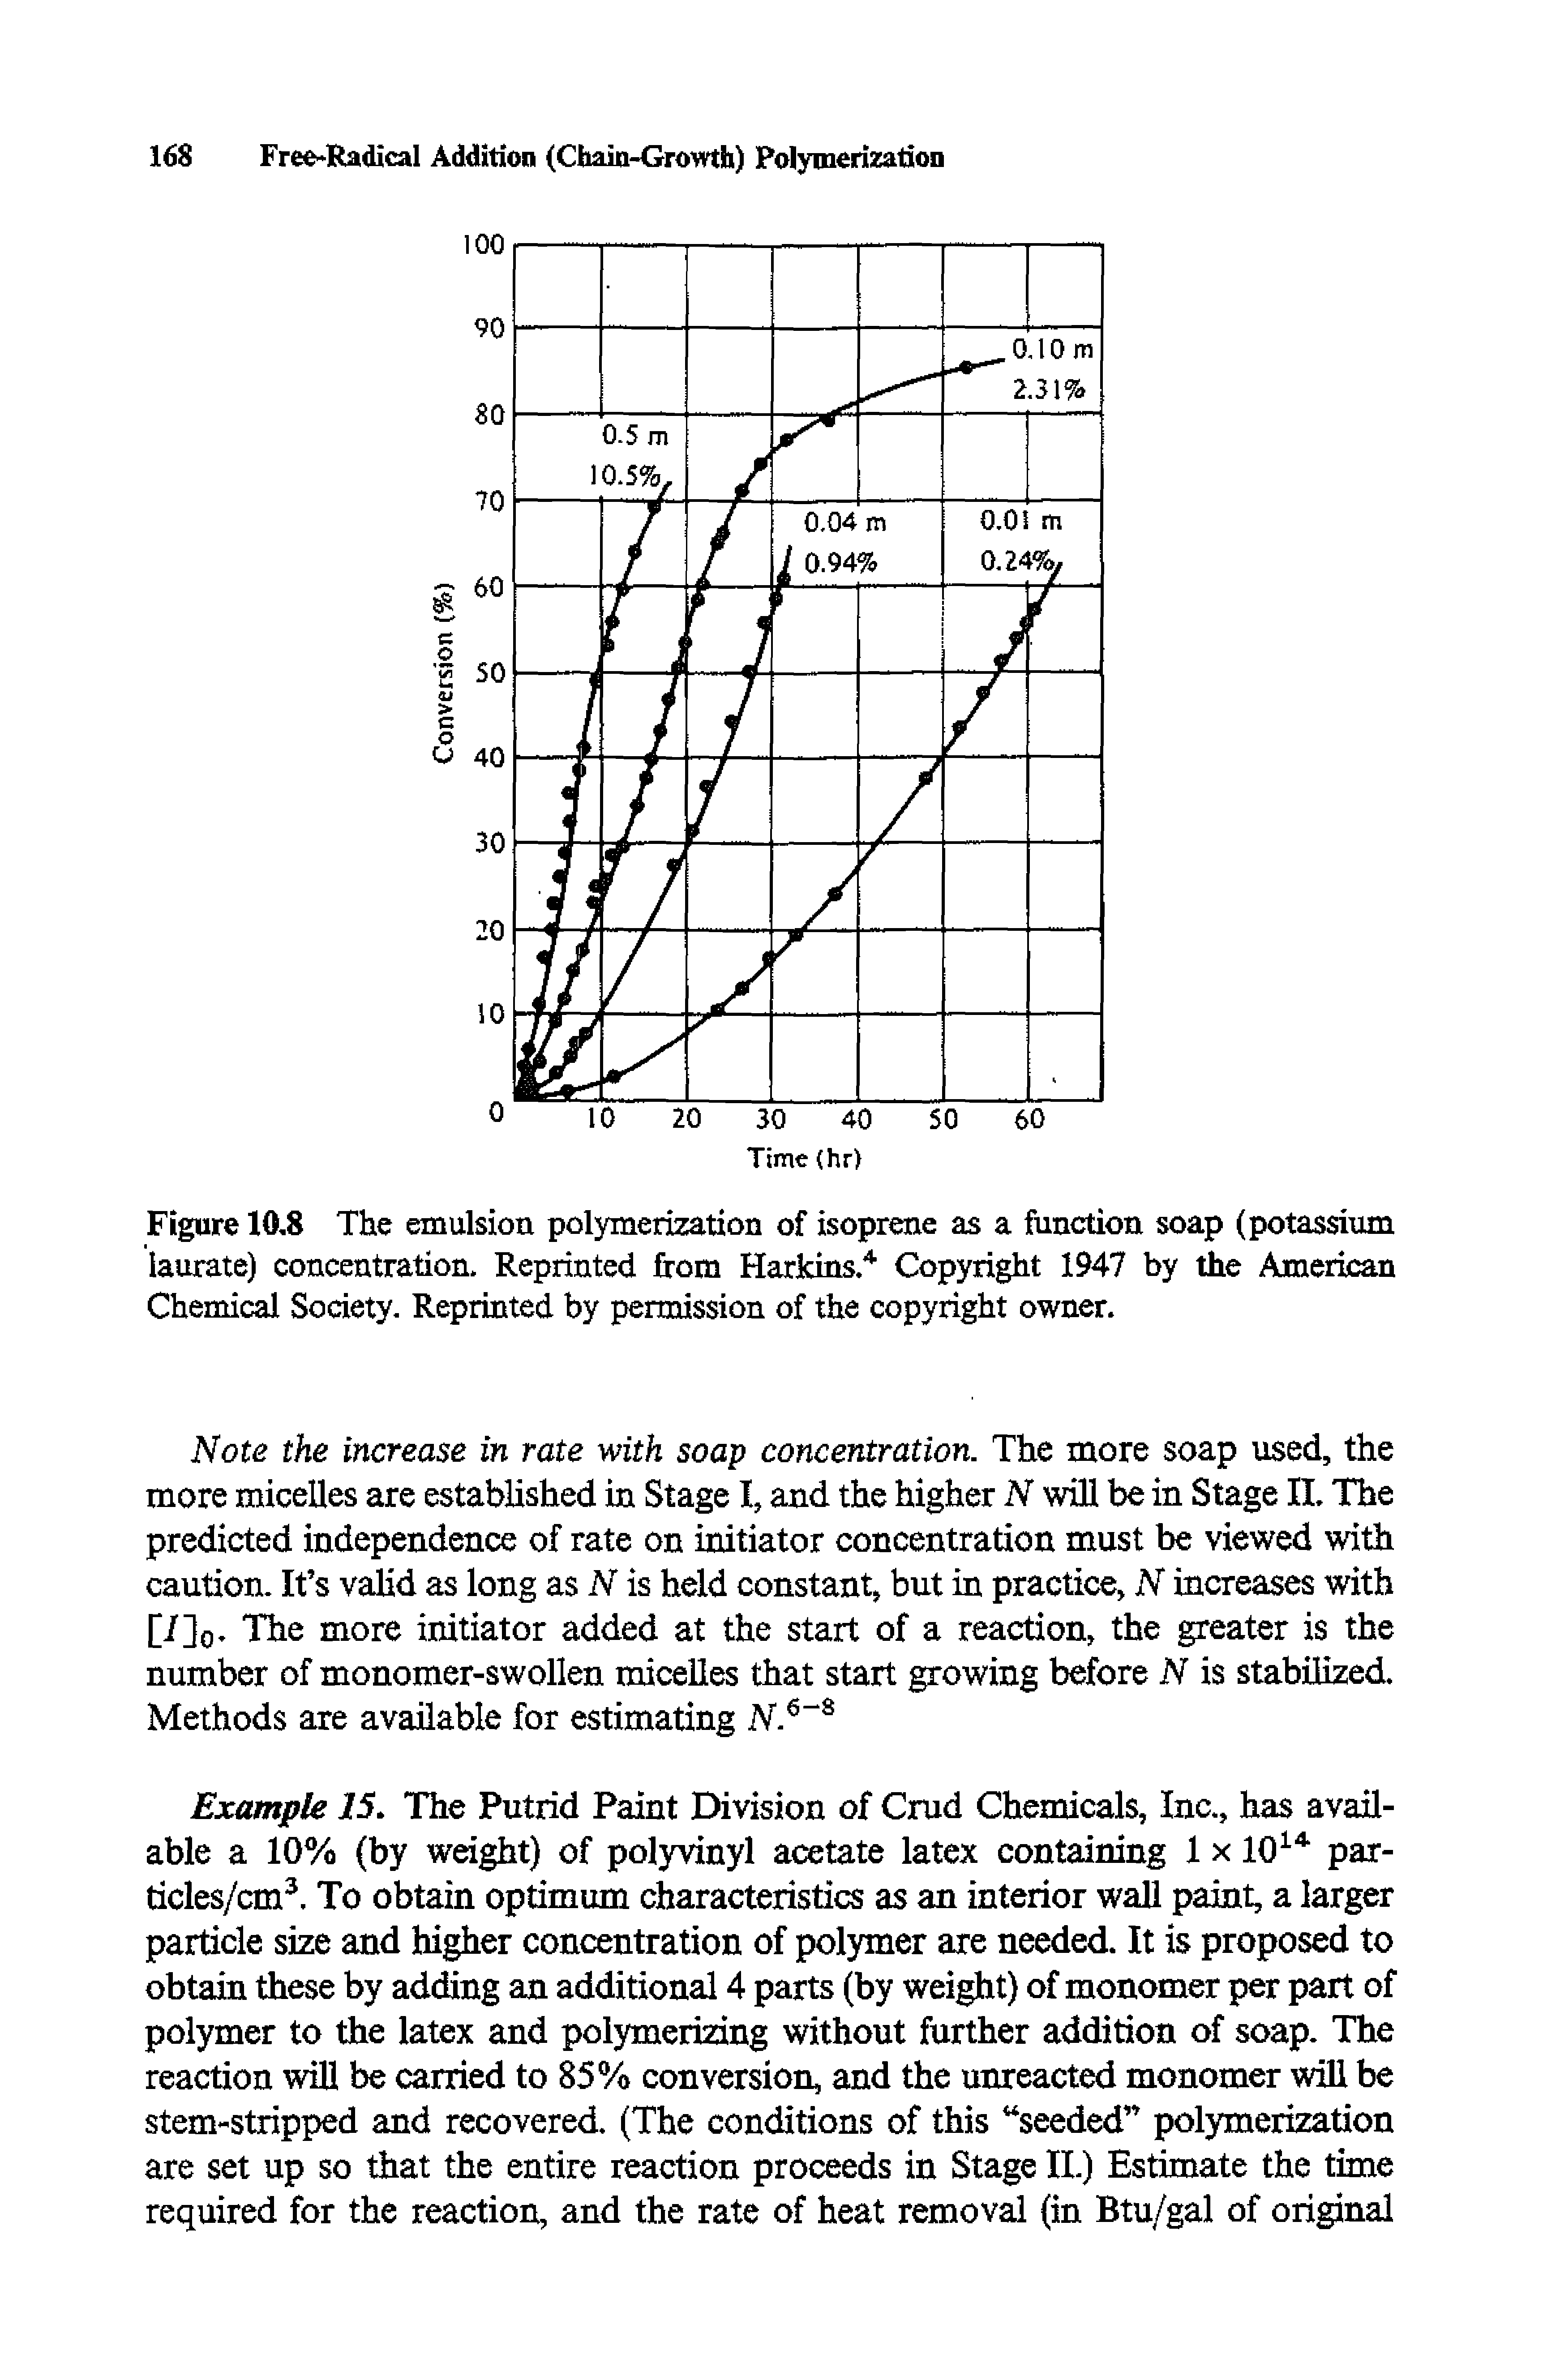 Figure 10.8 The emulsion polymerization of isoprene as a function soap (potassium laurate) concentration. Reprinted from Harkins. Copyright 1947 by the American Chemical Society. Reprinted by permission of the copyright owner.